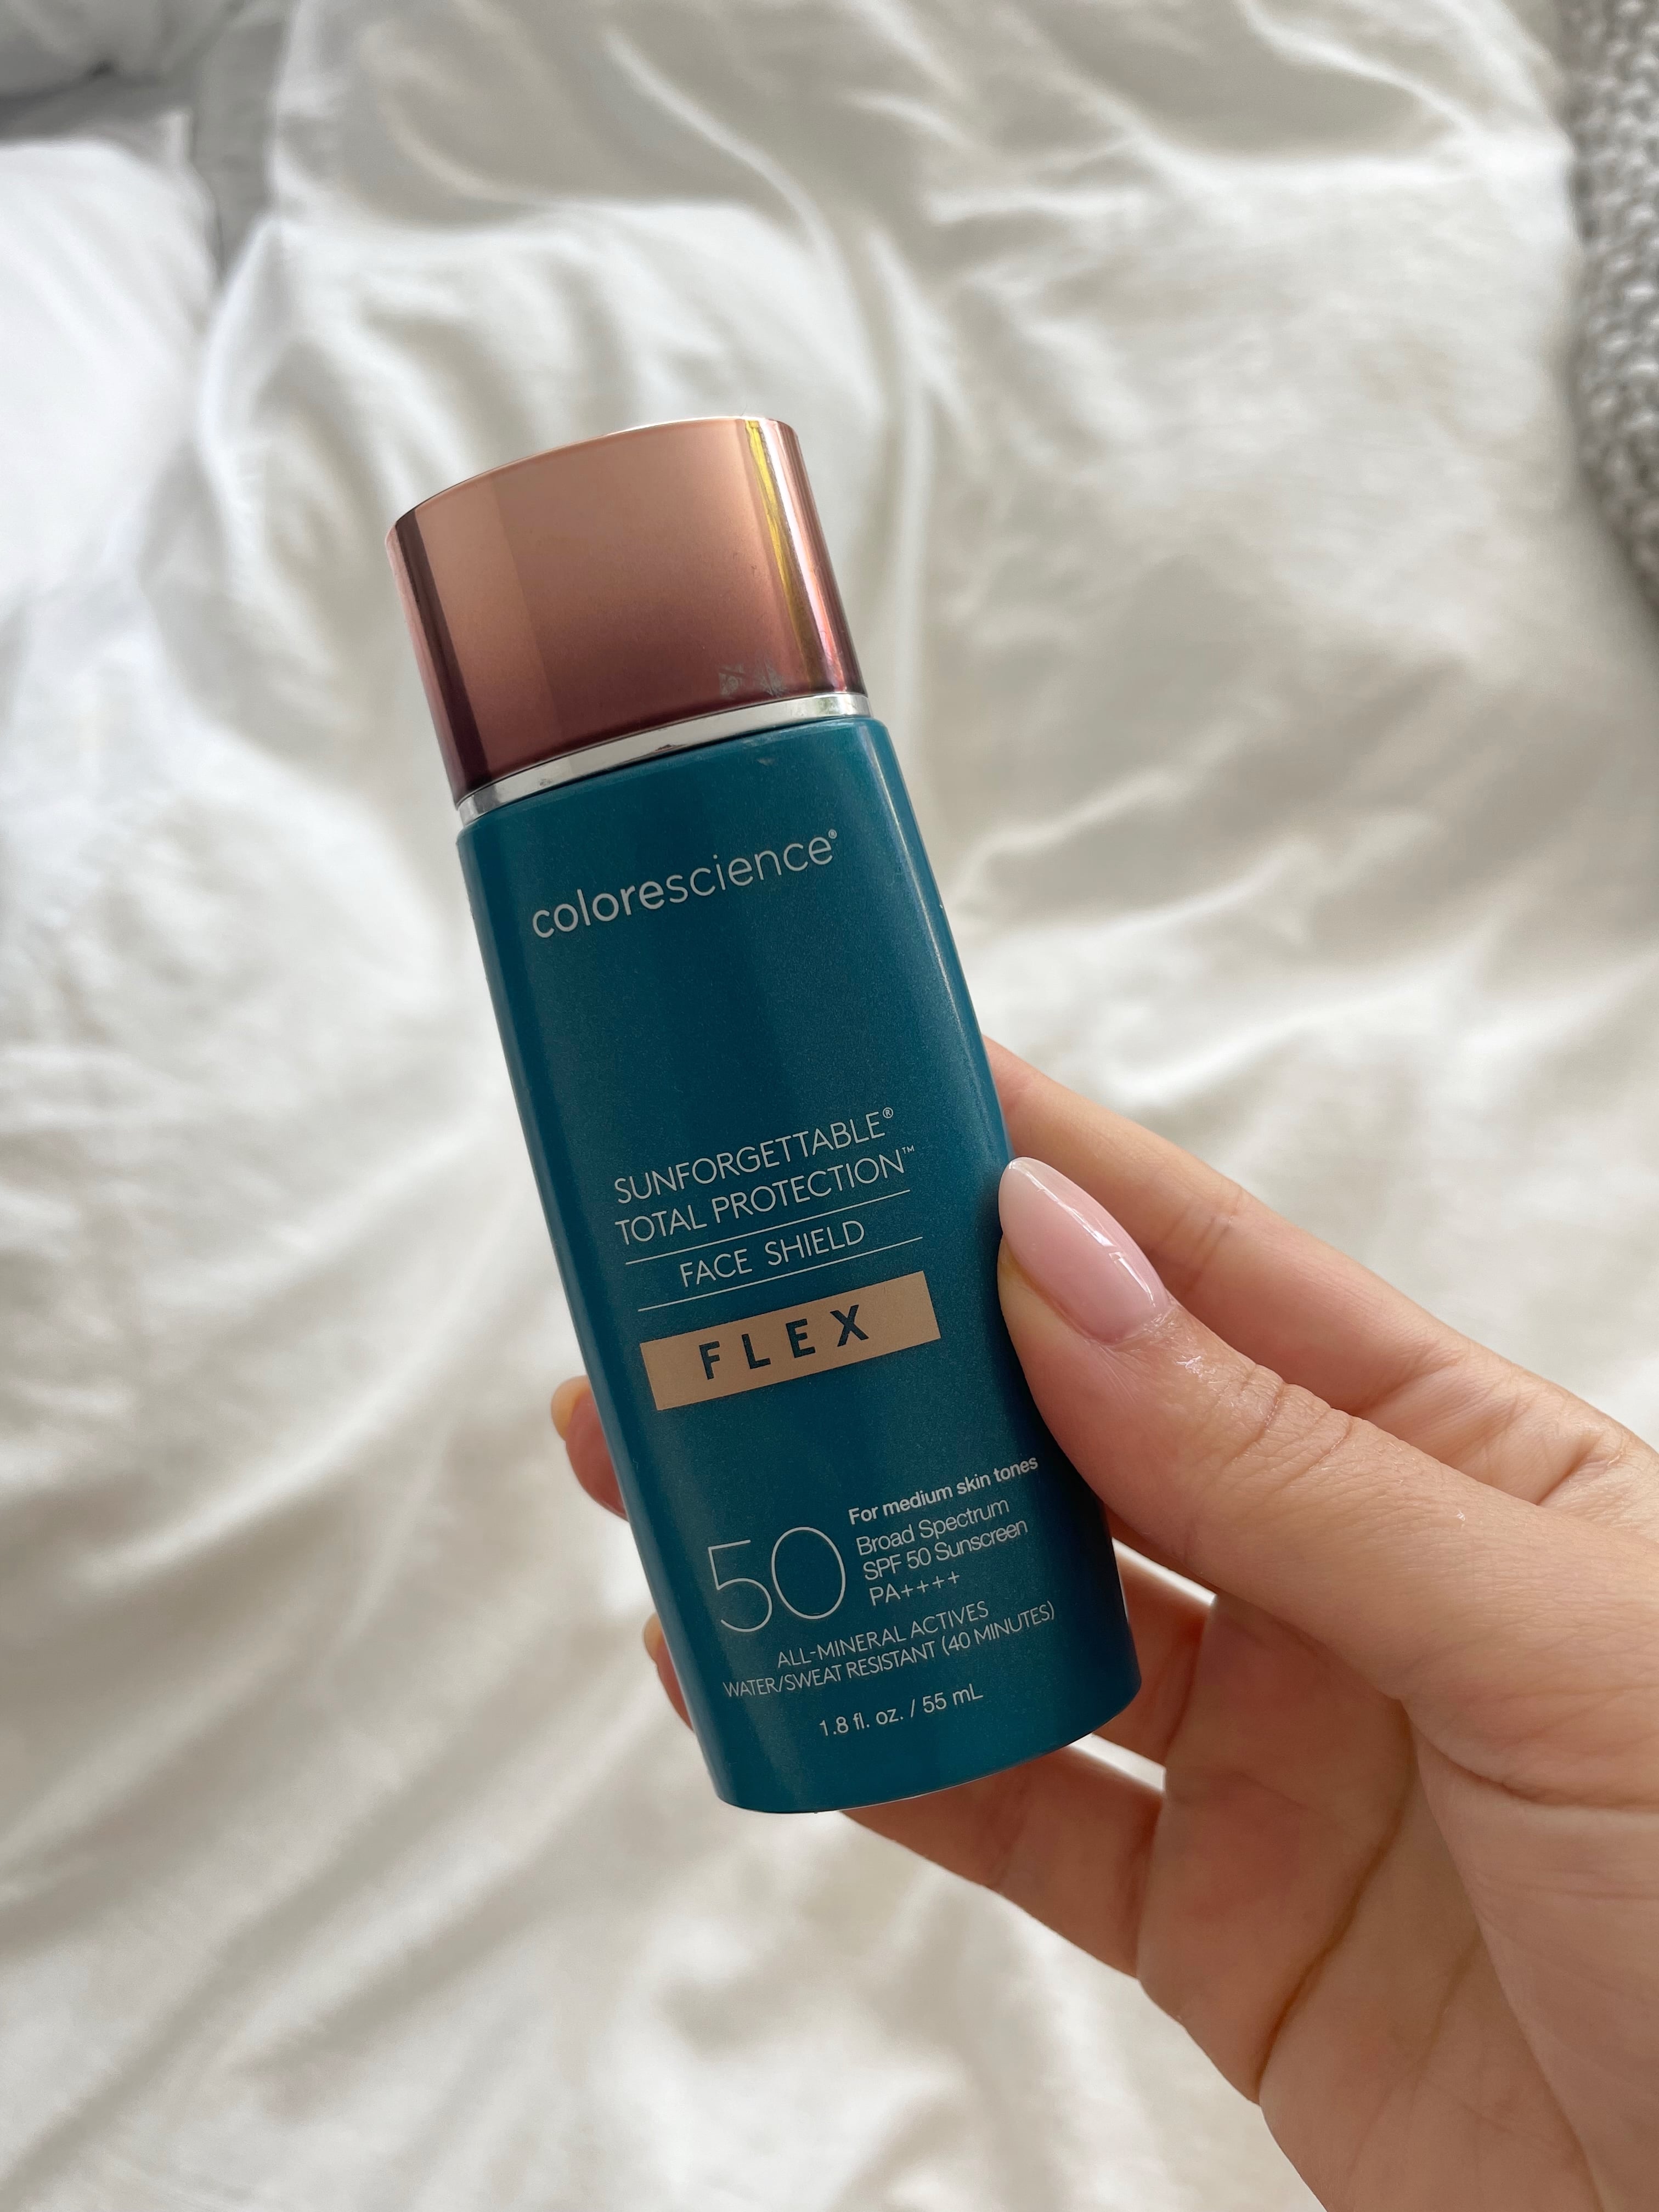 Colorescience Sunforgettable SPF Review: With Photos